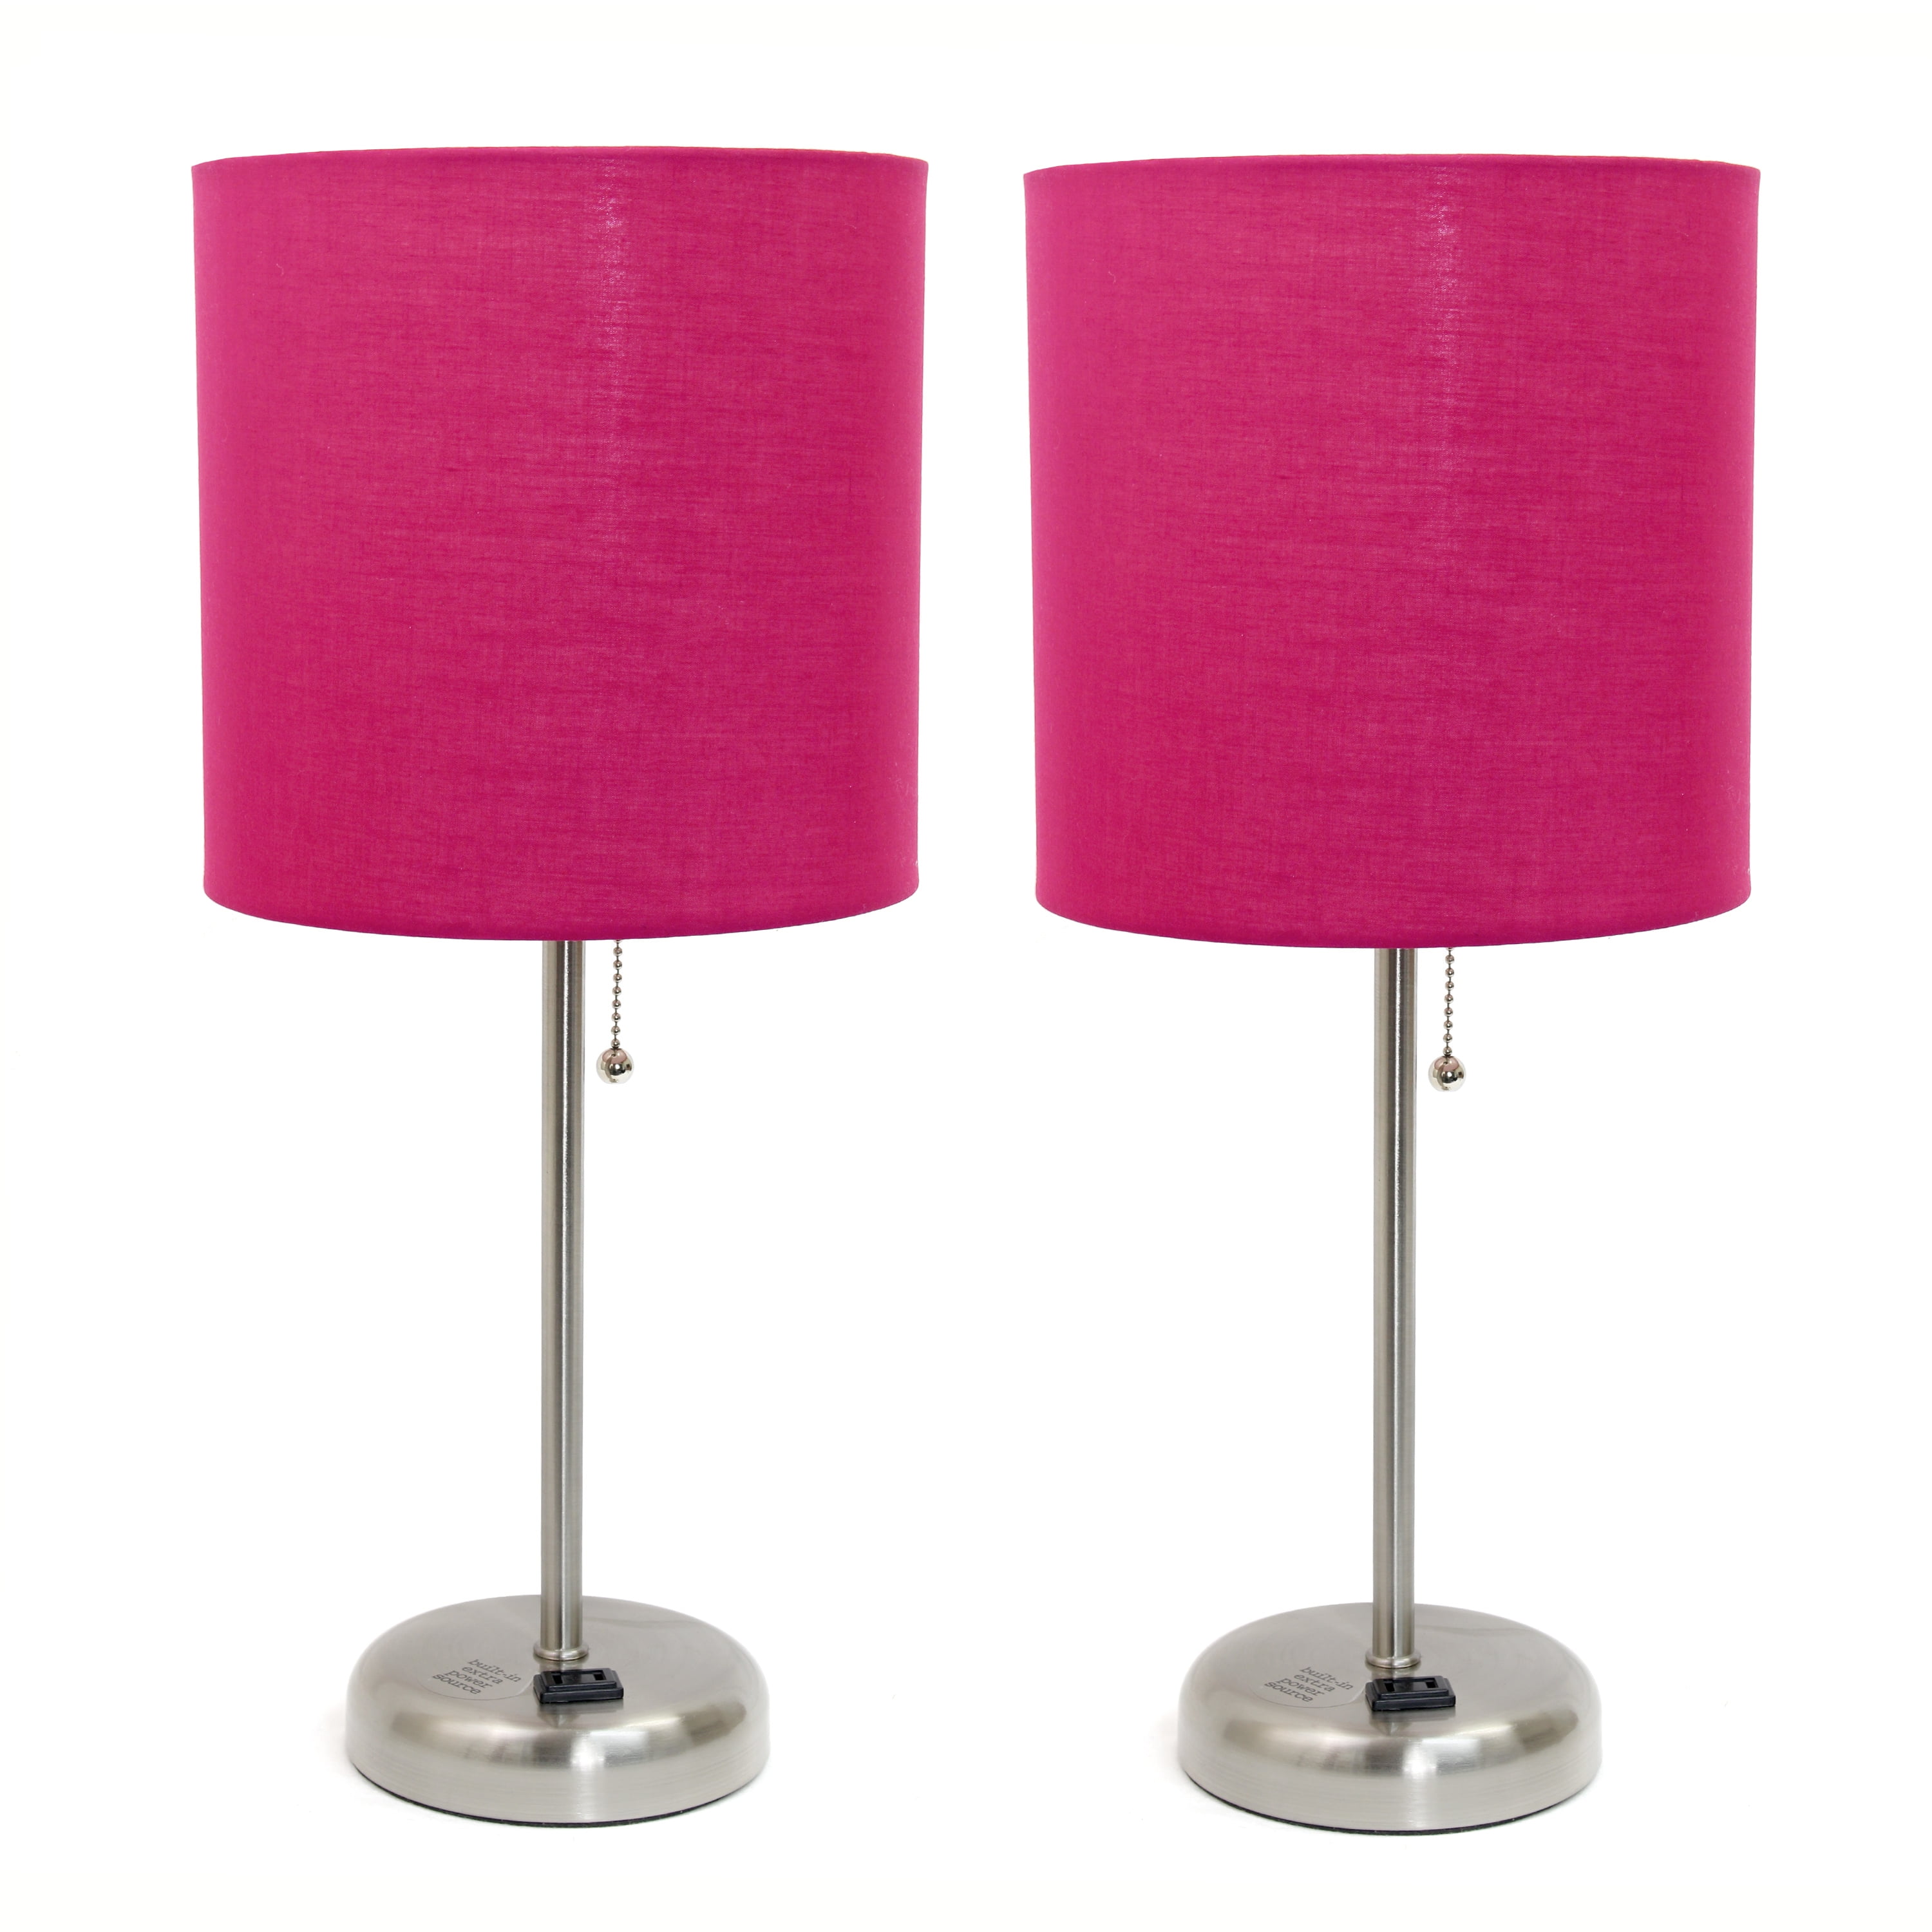 Lc2001-pnk-2pk Brushed Steel Stick Table Lamp With Charging Outlet & Fabric Shade, Pink - Set Of 2